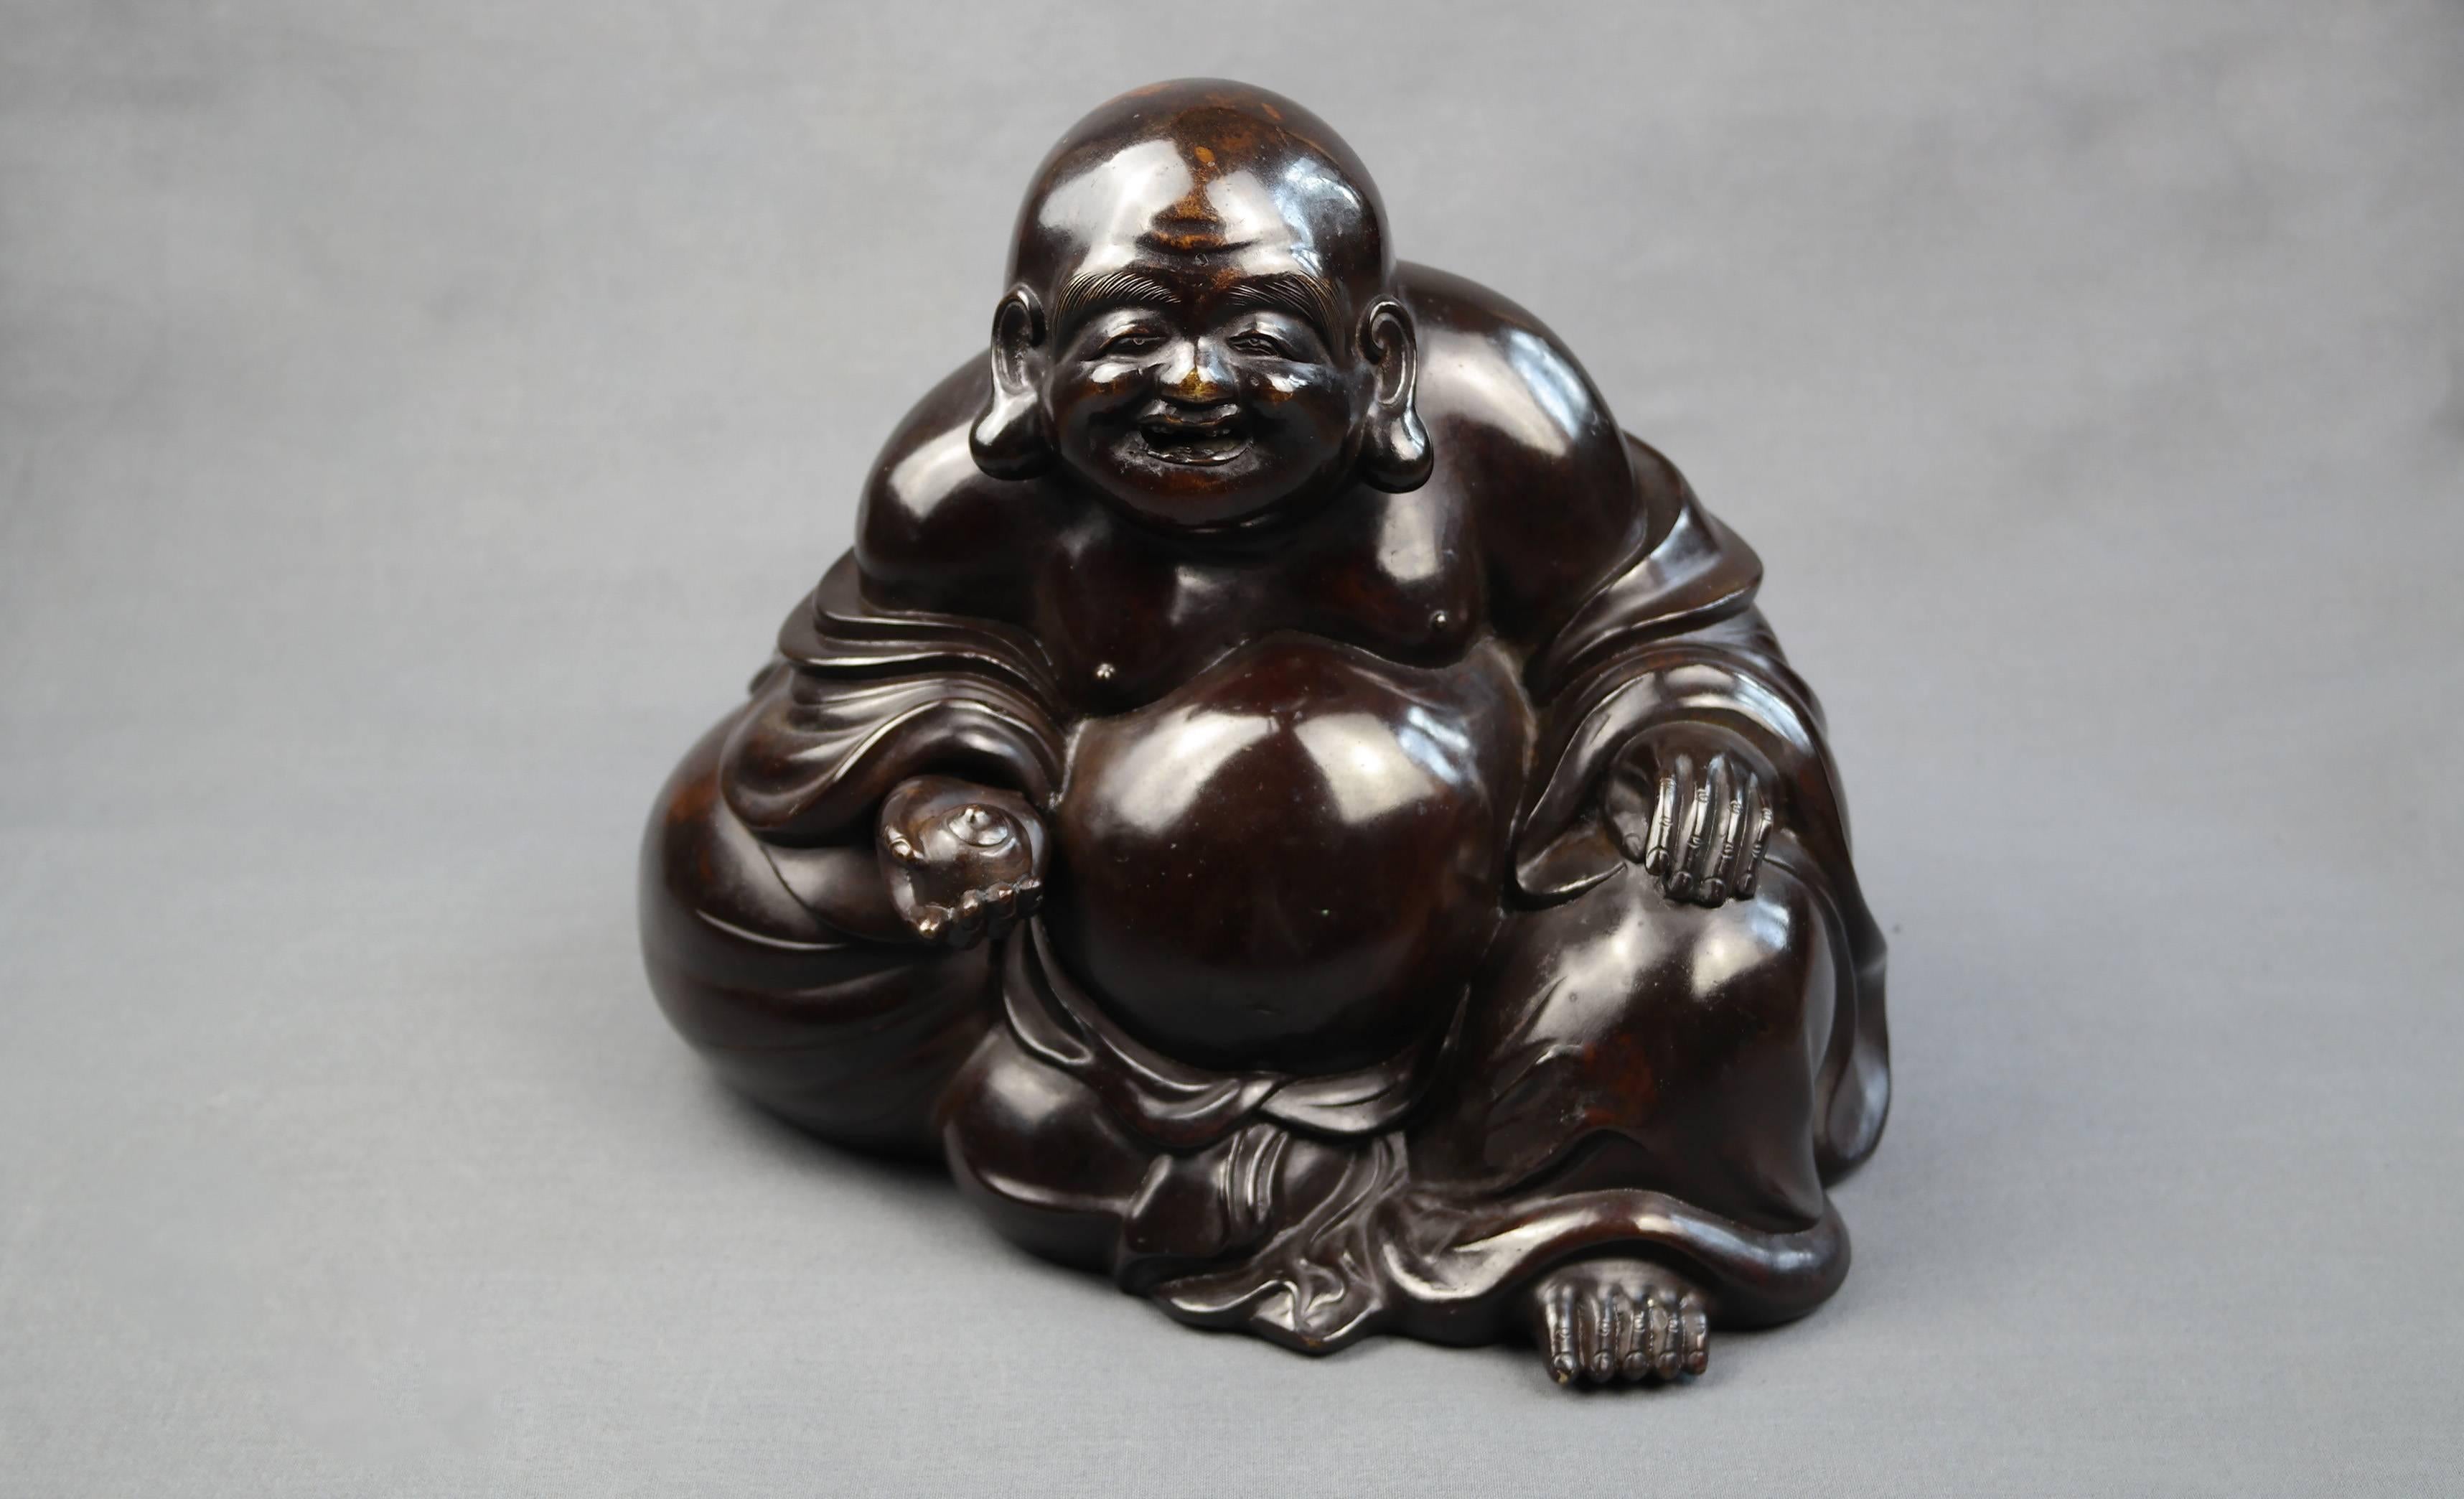 History recorded Hotei as an eccentric Zen monk who lived a peripatetic life during the later Liang Dynasty. His name ‘Hotei’, literately meaning ‘cloth sack’, derives from an iconic image of him carrying a large sack that he used to wander around